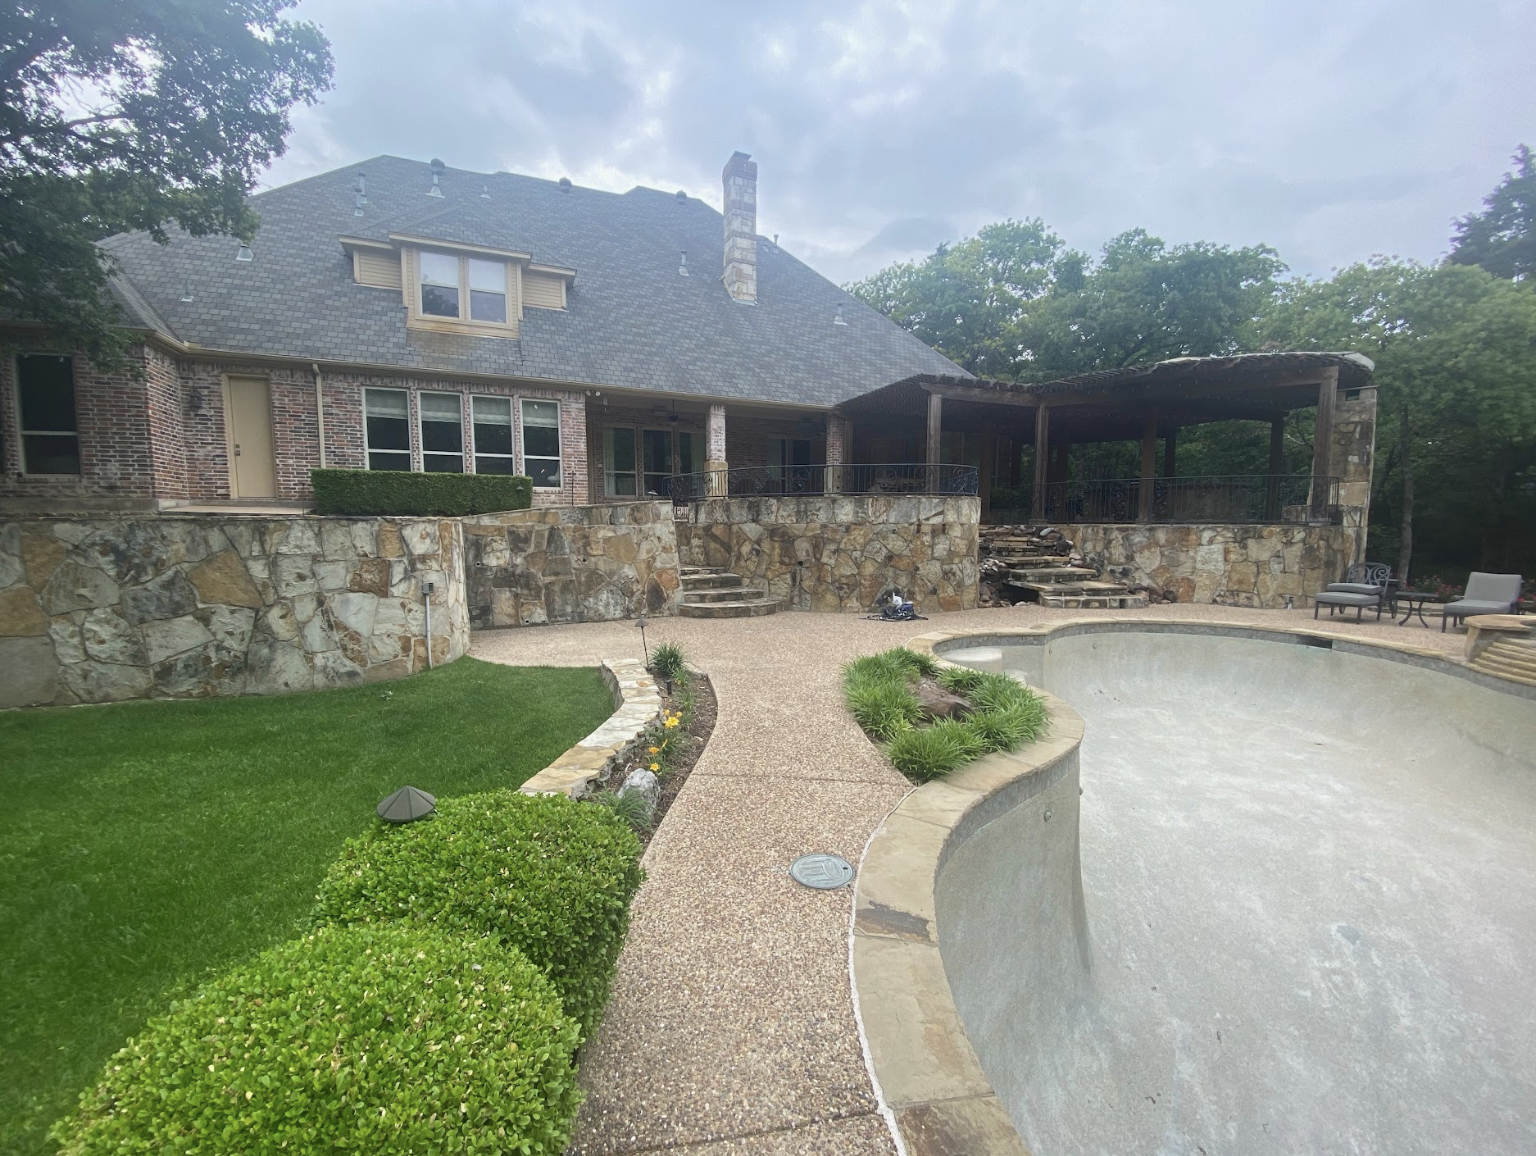 Residence before the back yard renovation by Mike Farley, owner of Farley Pool Designs